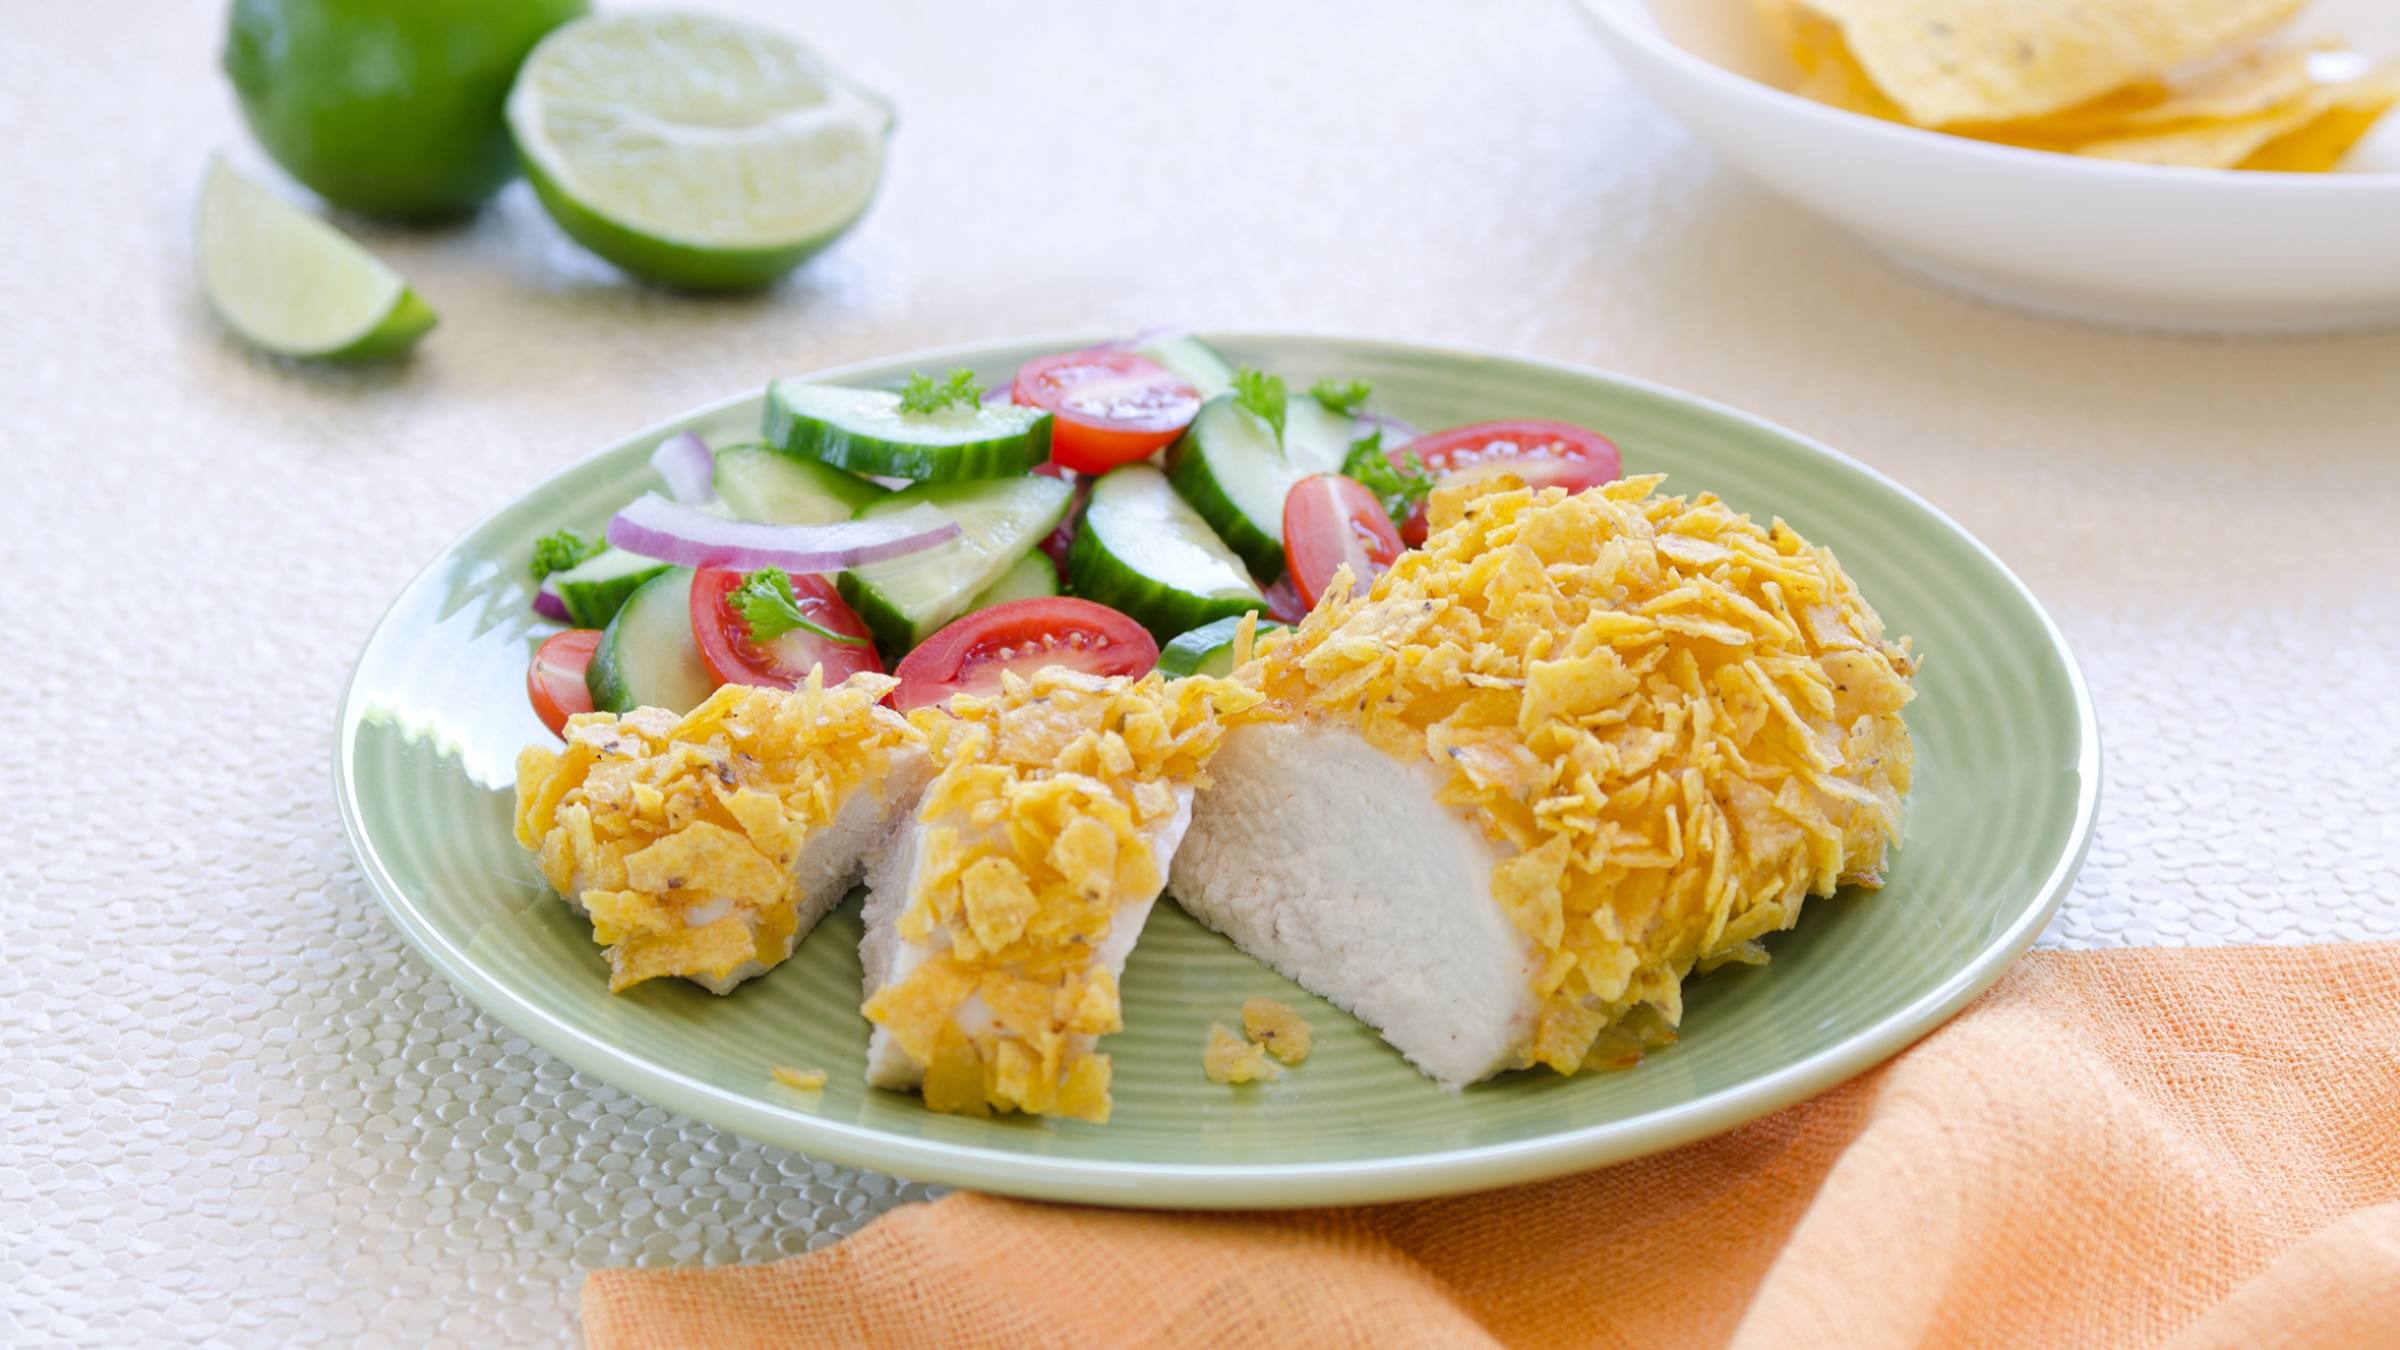 Chipotle-Lime-Crusted Chicken